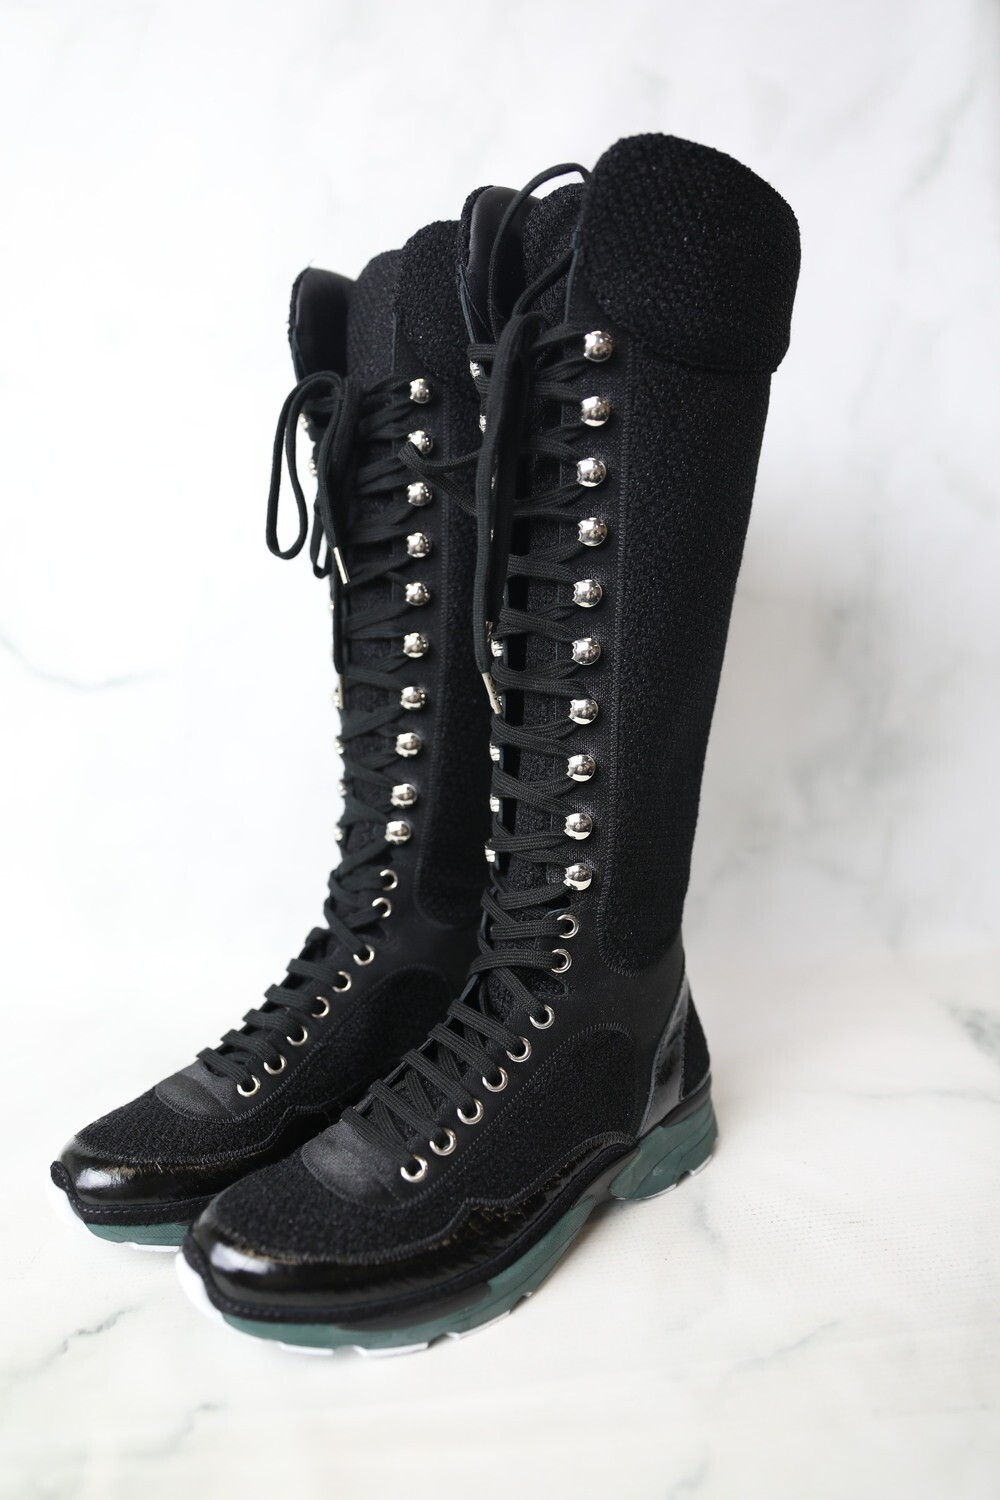 Auth CHANEL - Black Leather Wool Boots